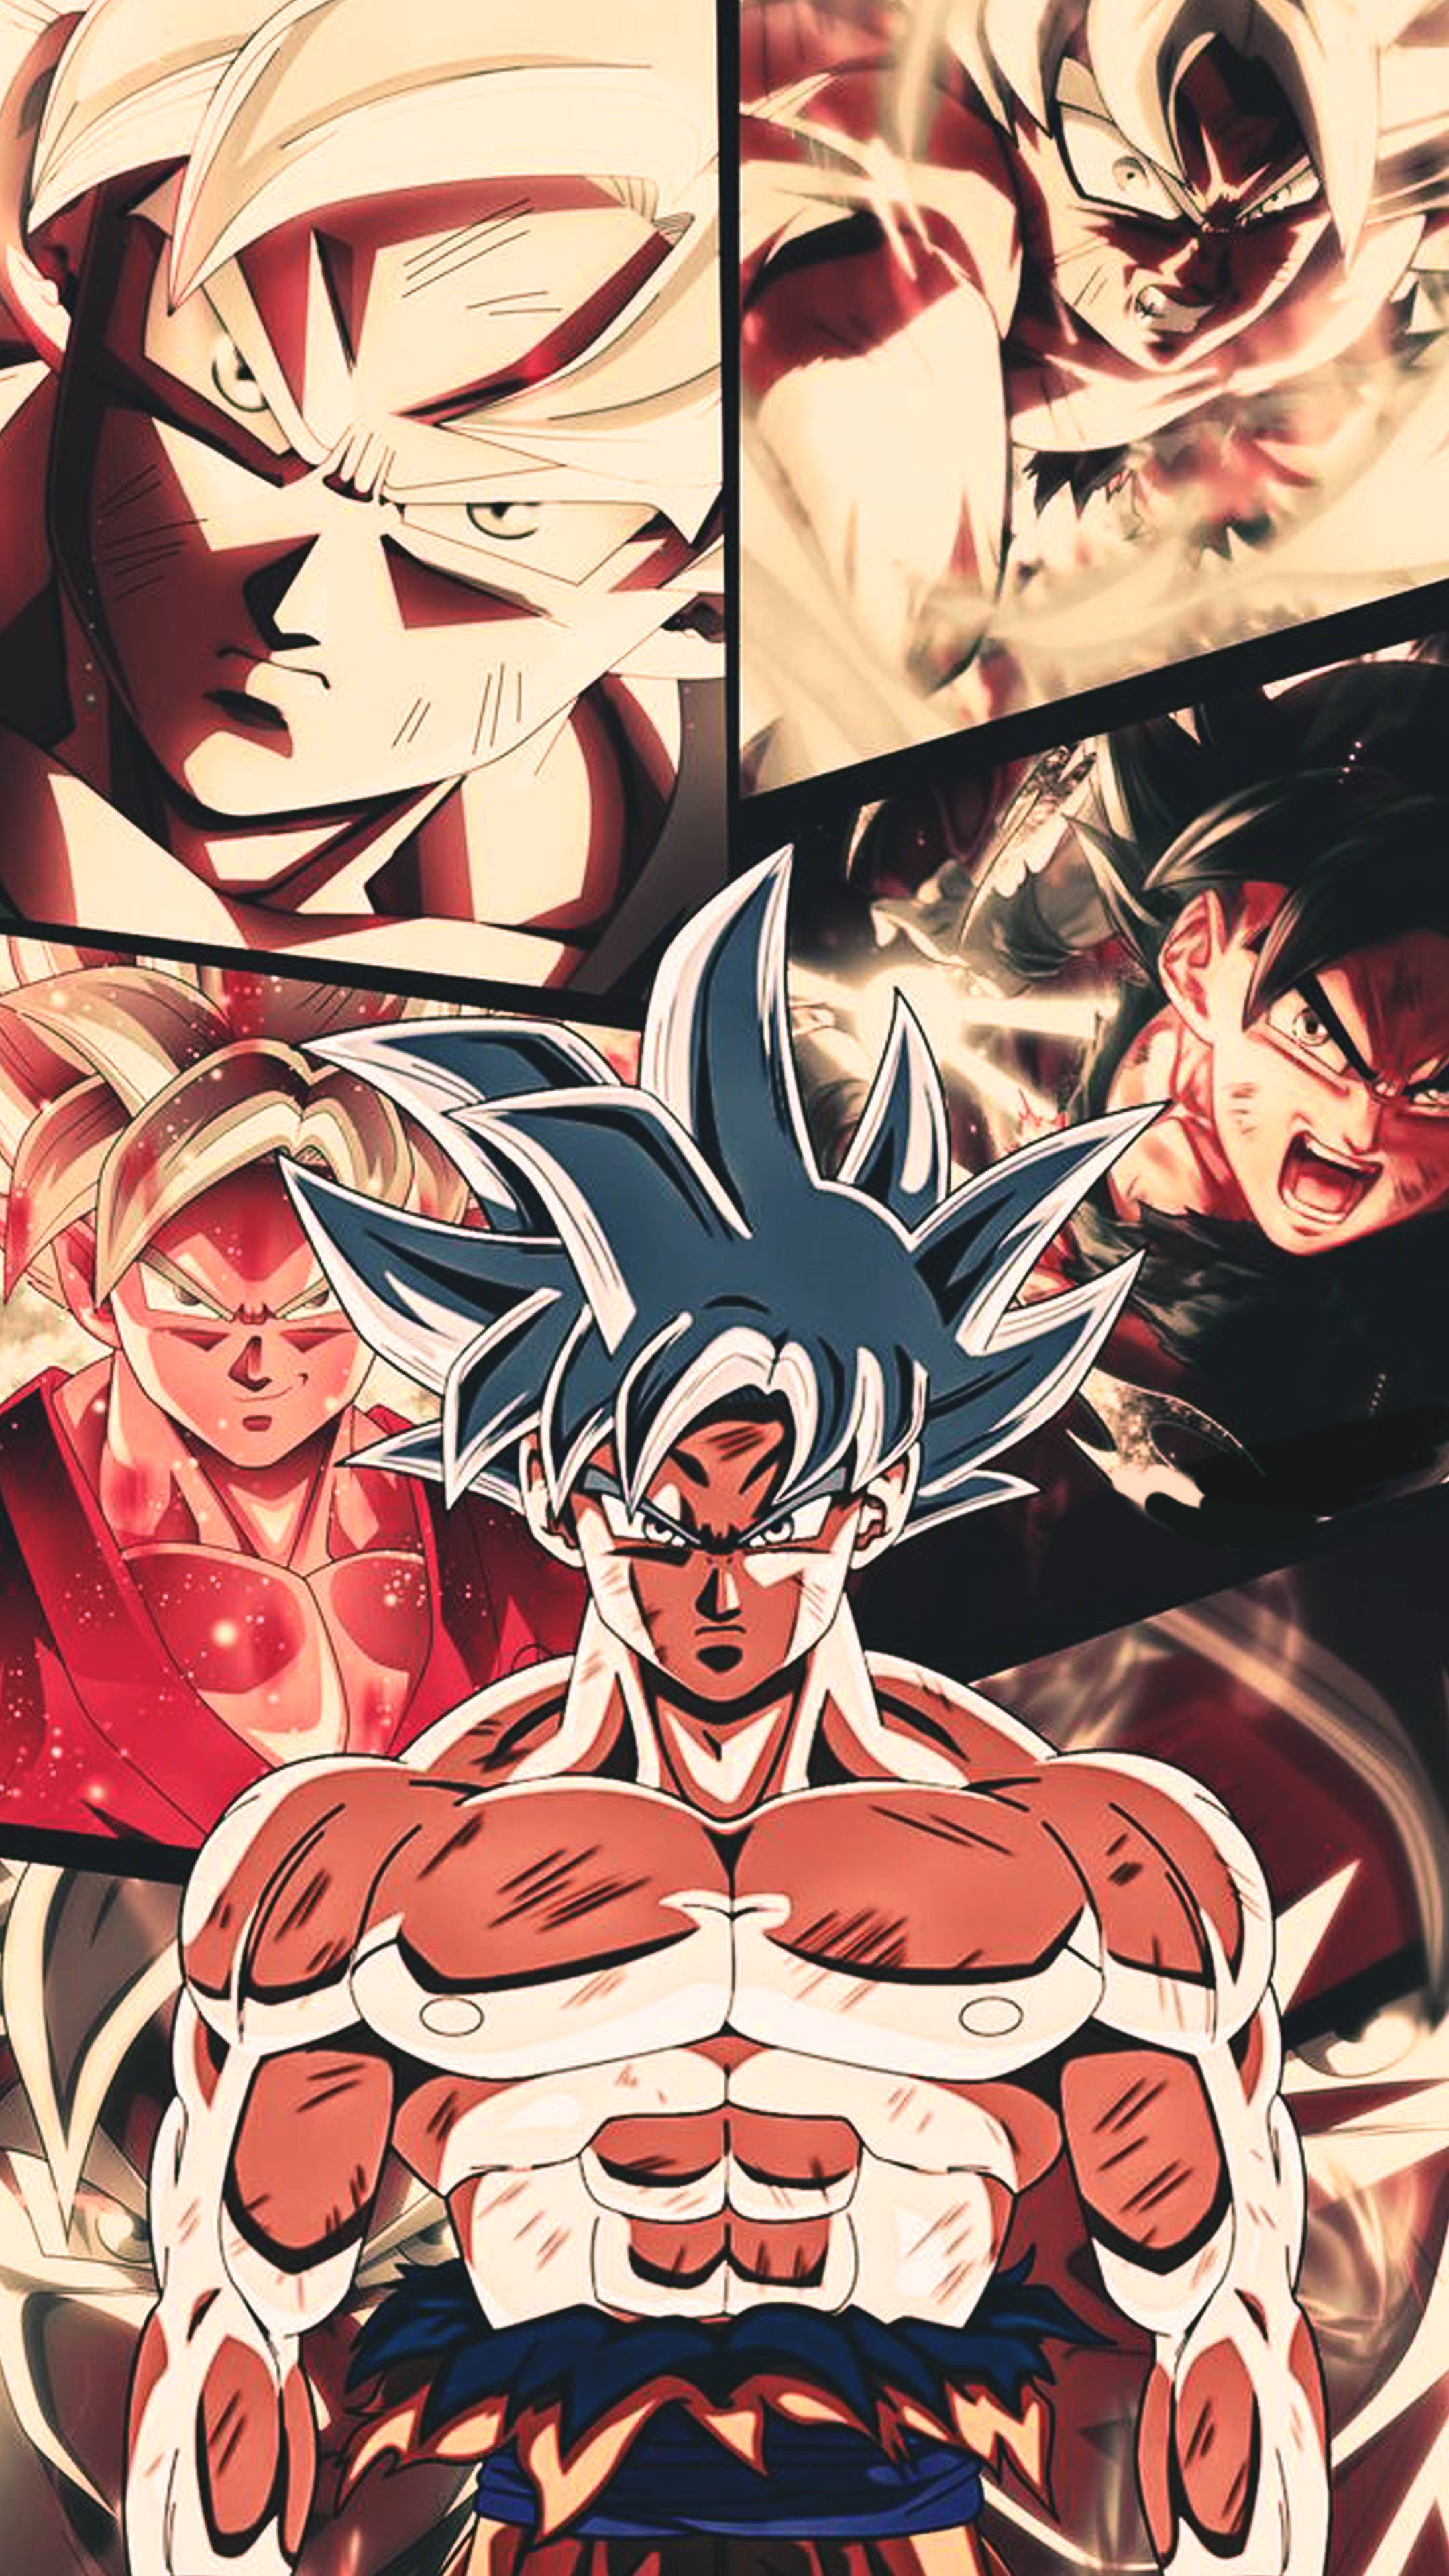 4K Wallpaper of DBZ and Super for Phones